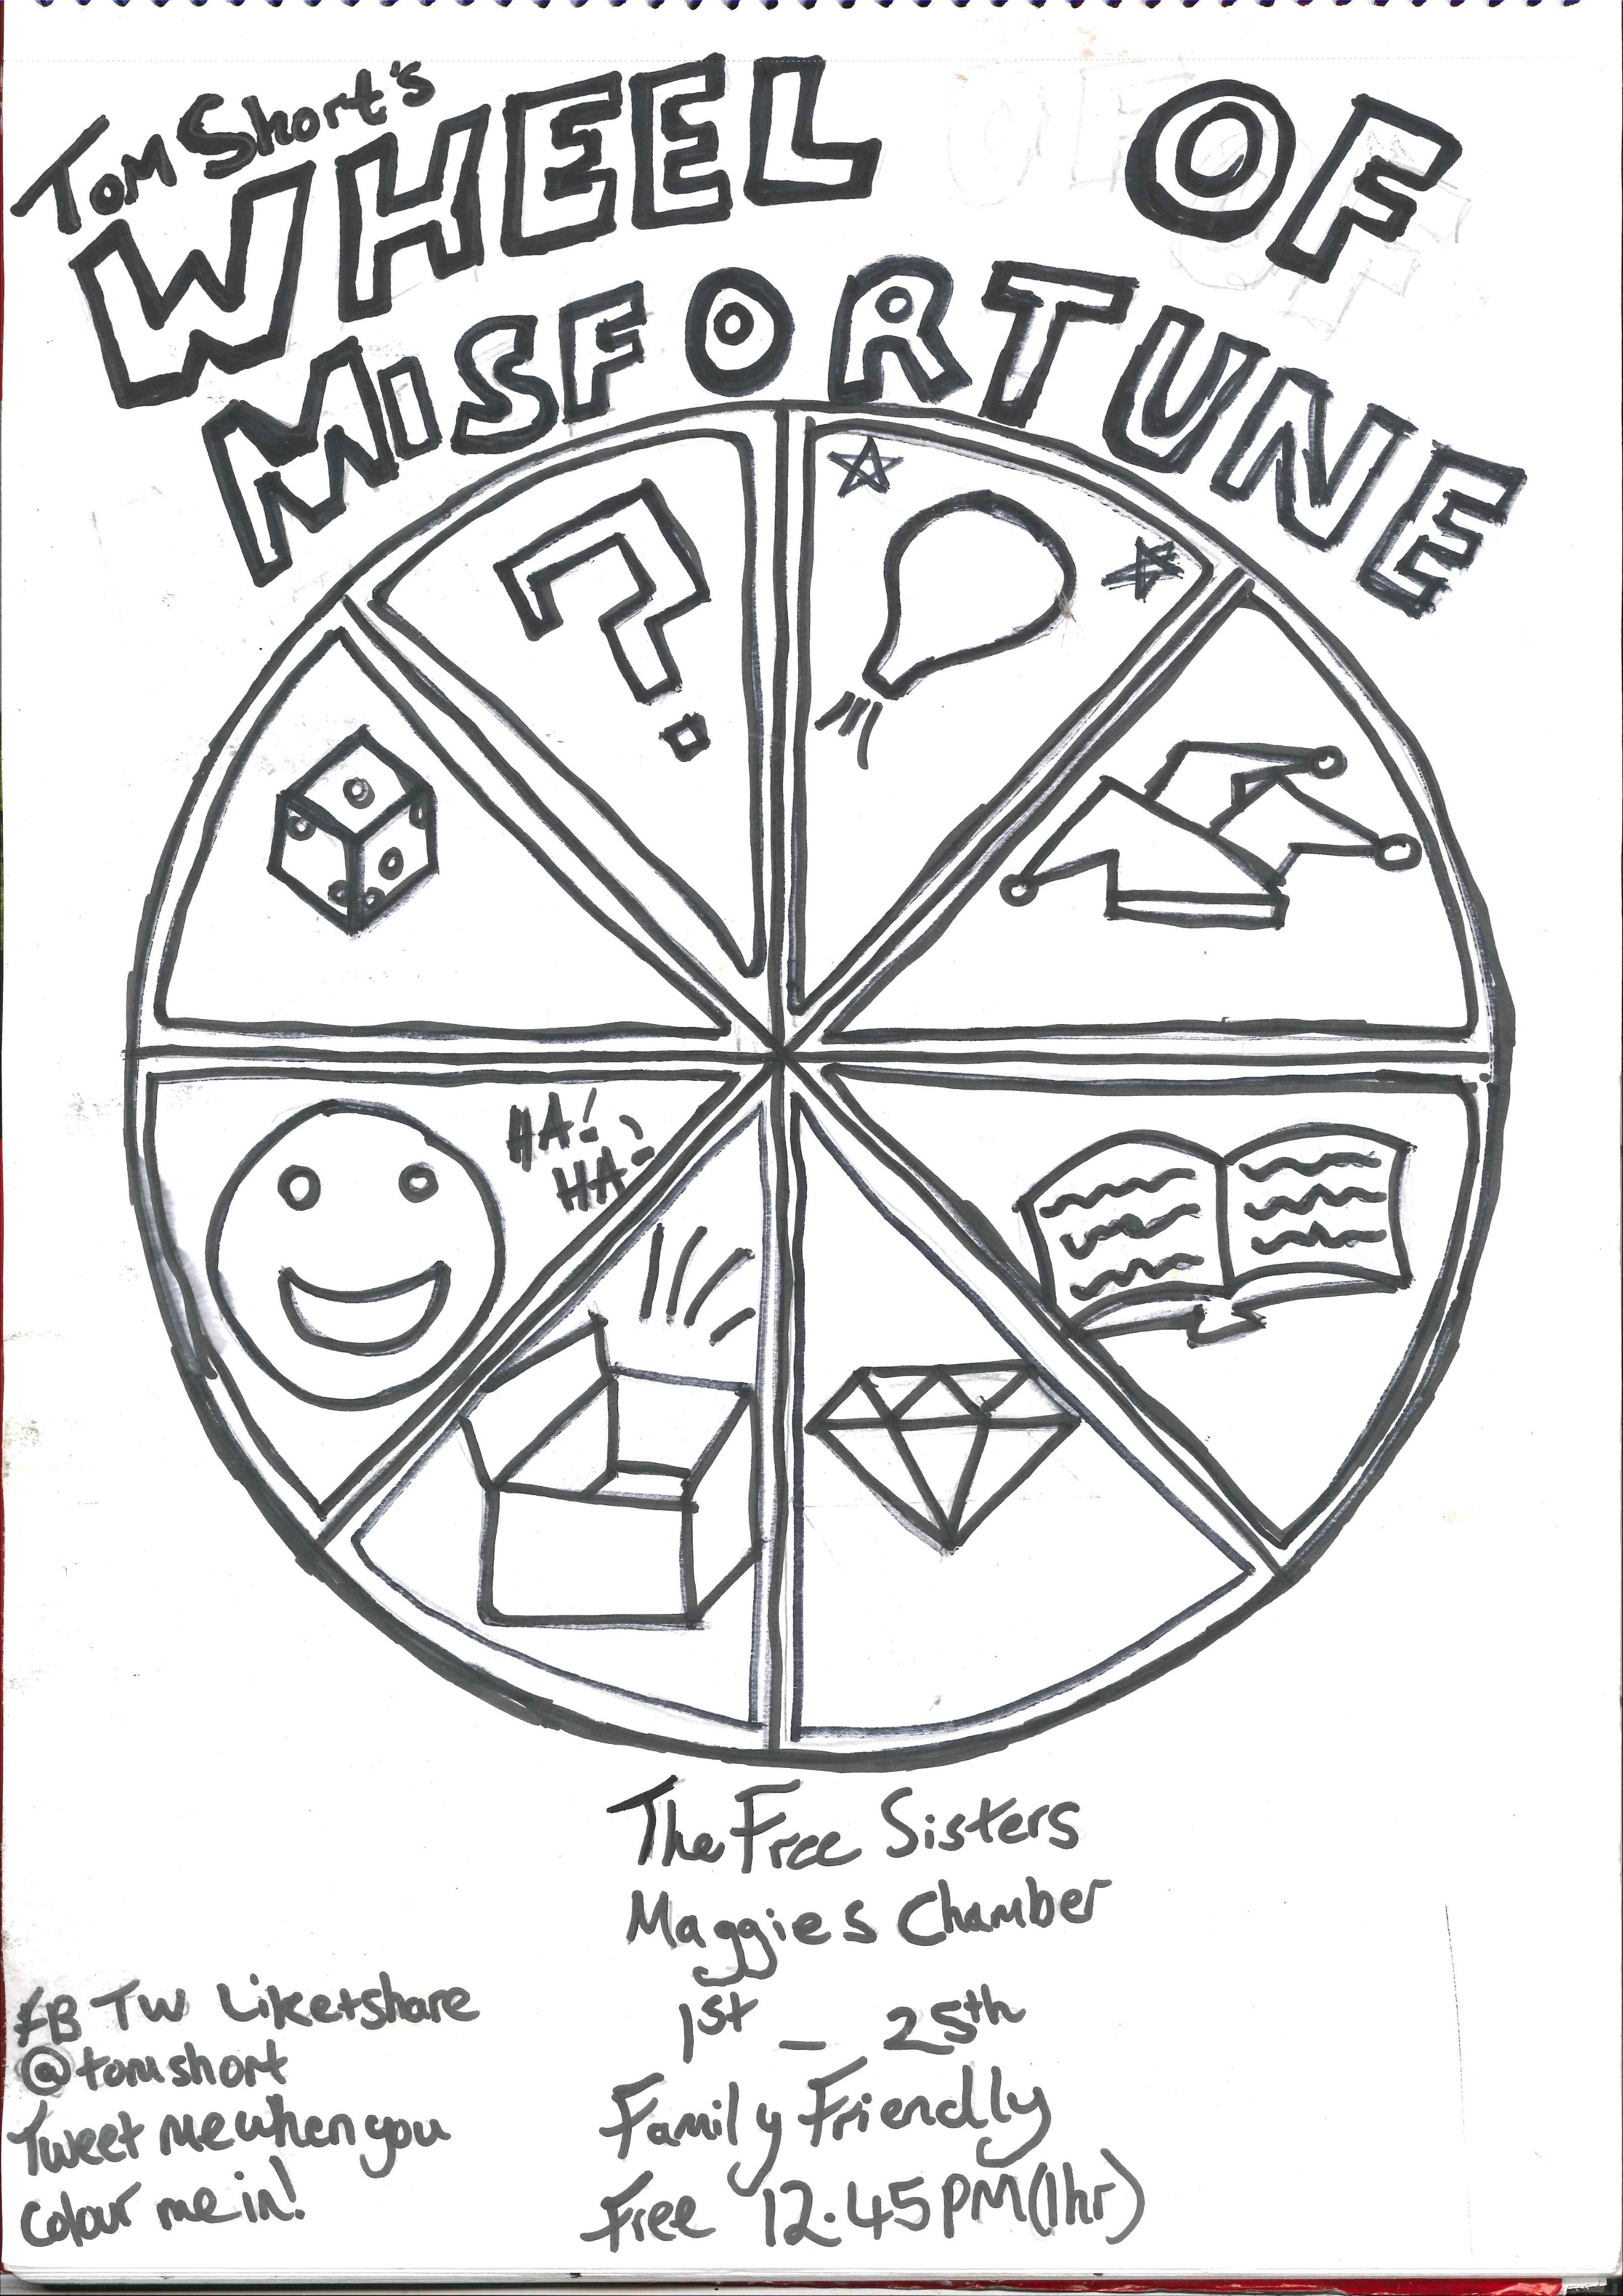 The poster for Tom Short's Wheel of Misfortune